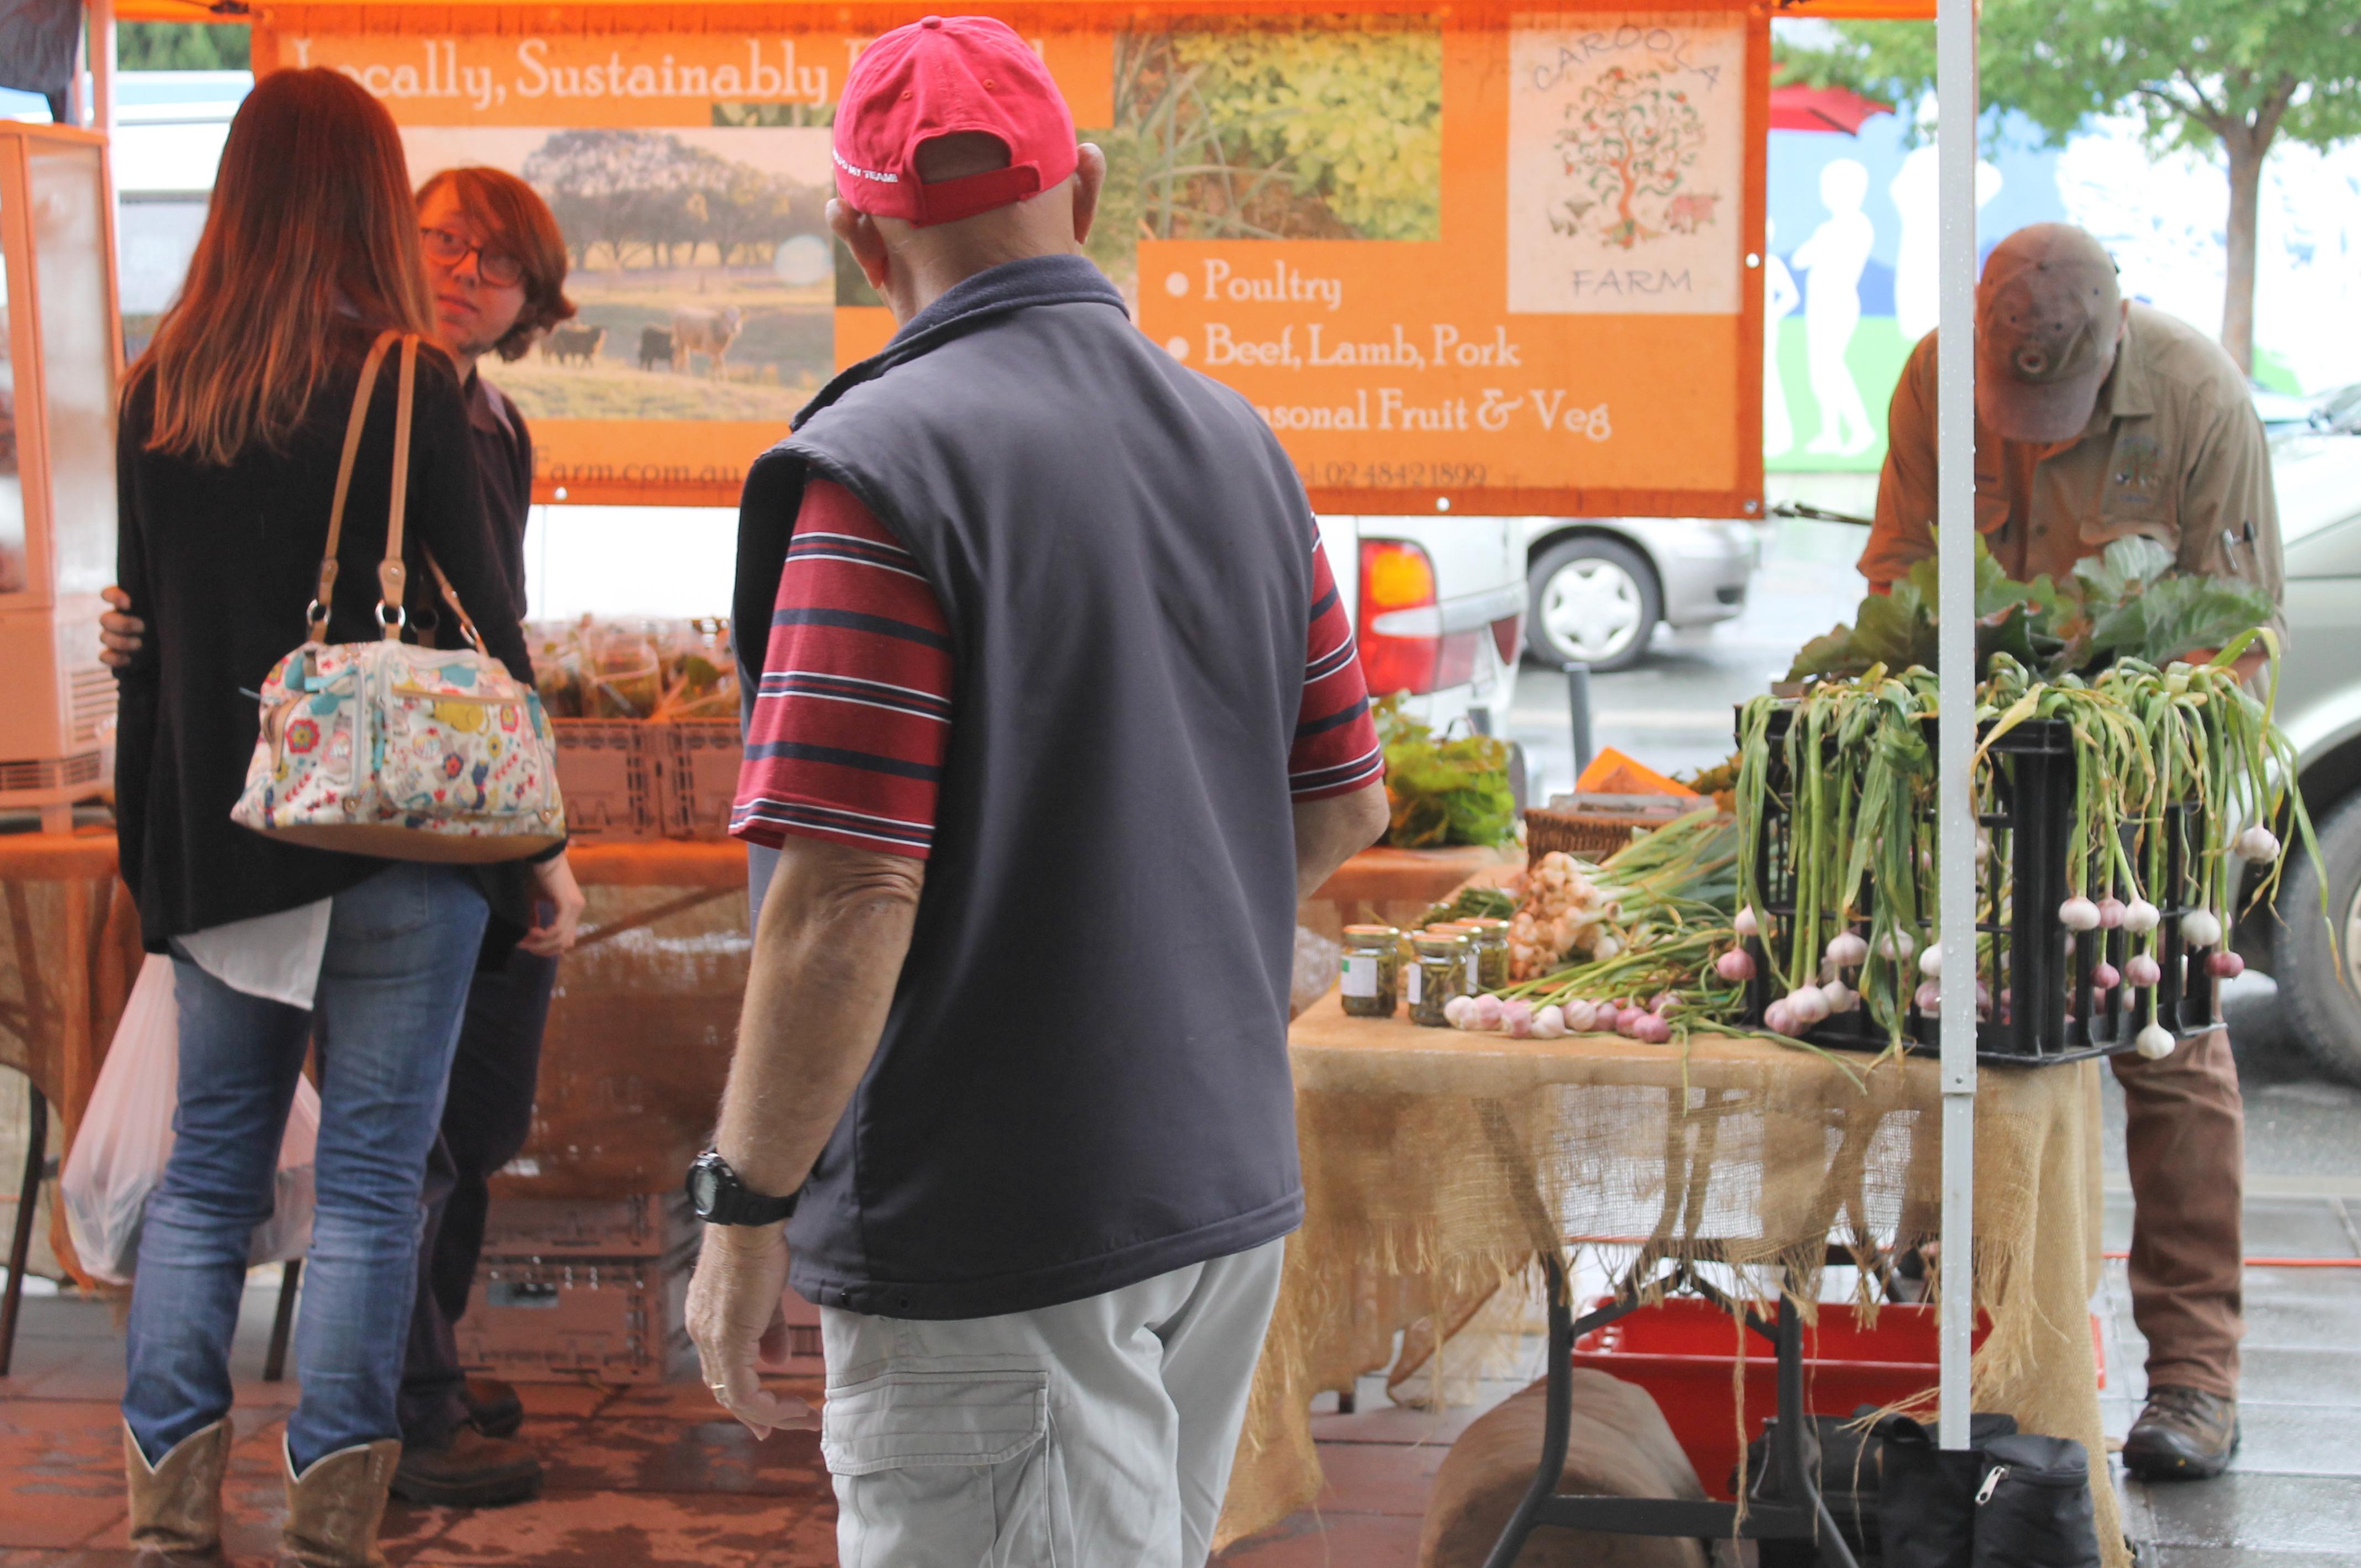 Southern Harvest Markets at Queanbeyan